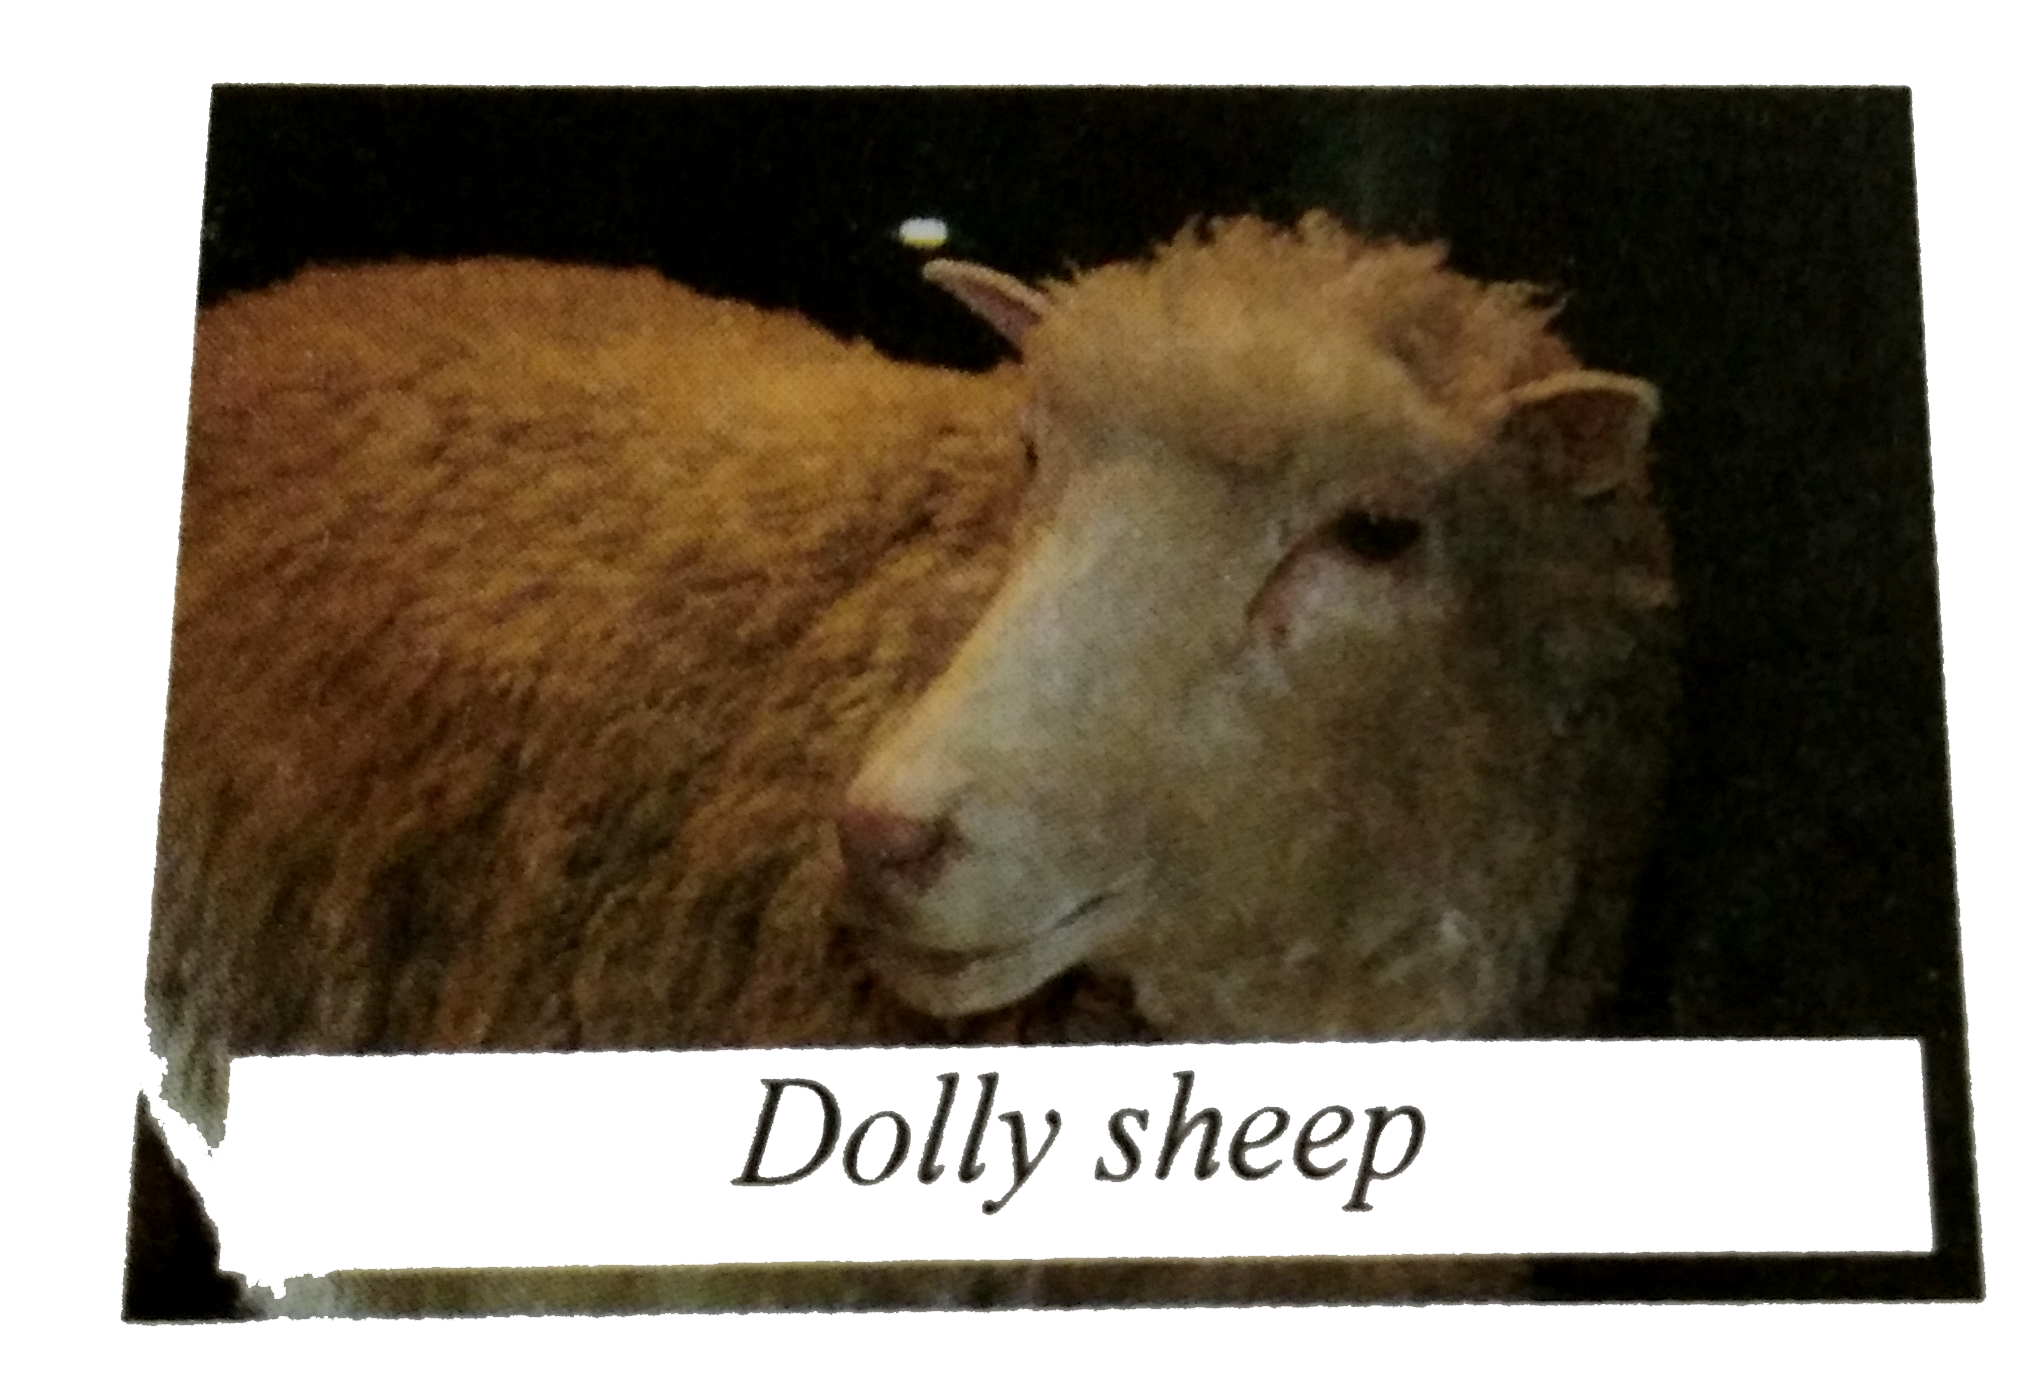 The sheep Dolly was born in ............... .